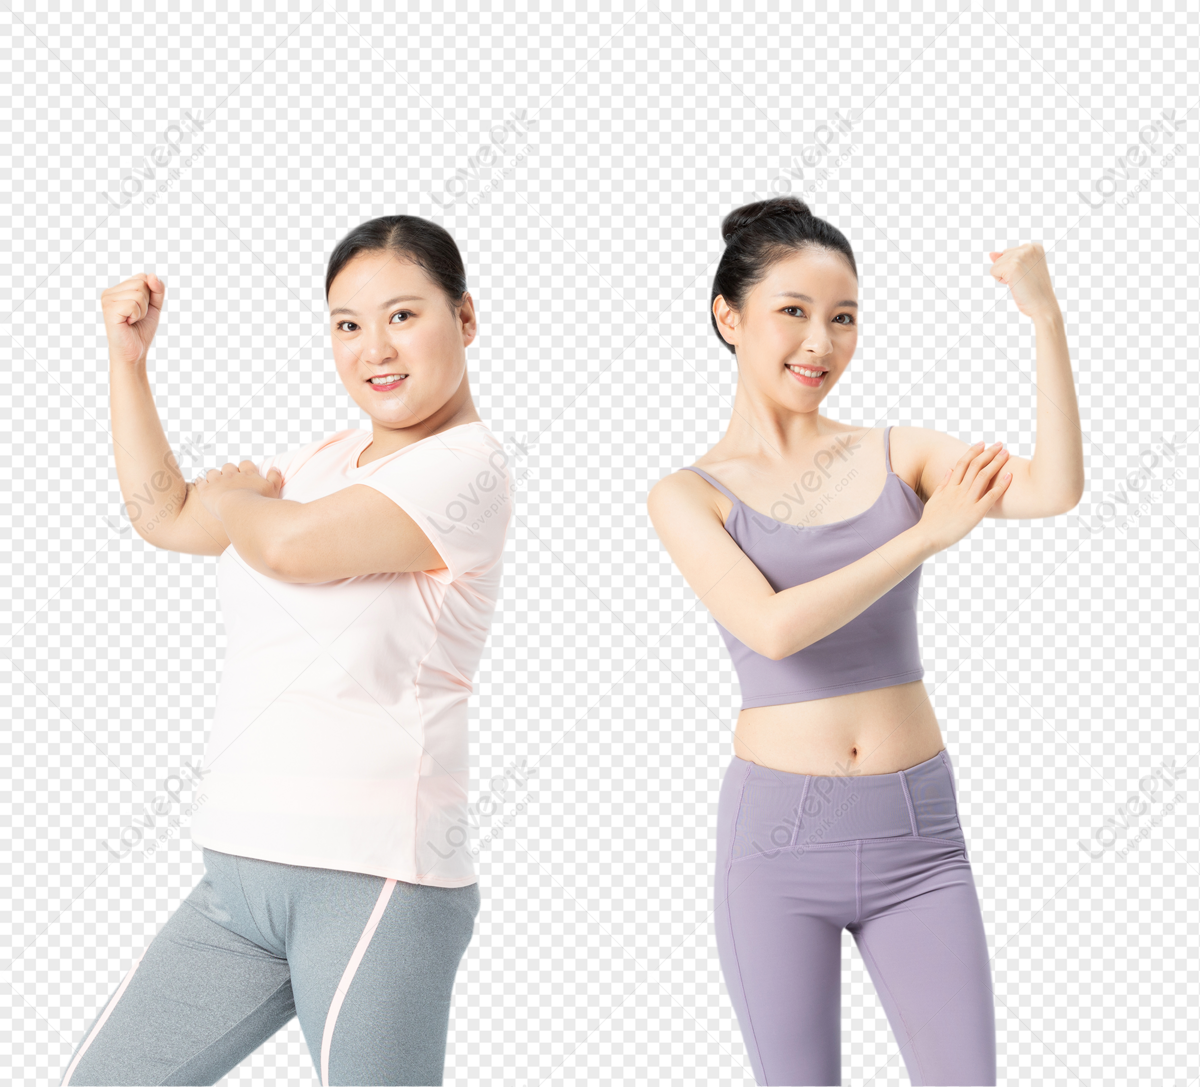 Transformation. Young Fat Woman Becoming Slim Fit Girl Stock Image - Image  of dietitian, fatty: 89153347